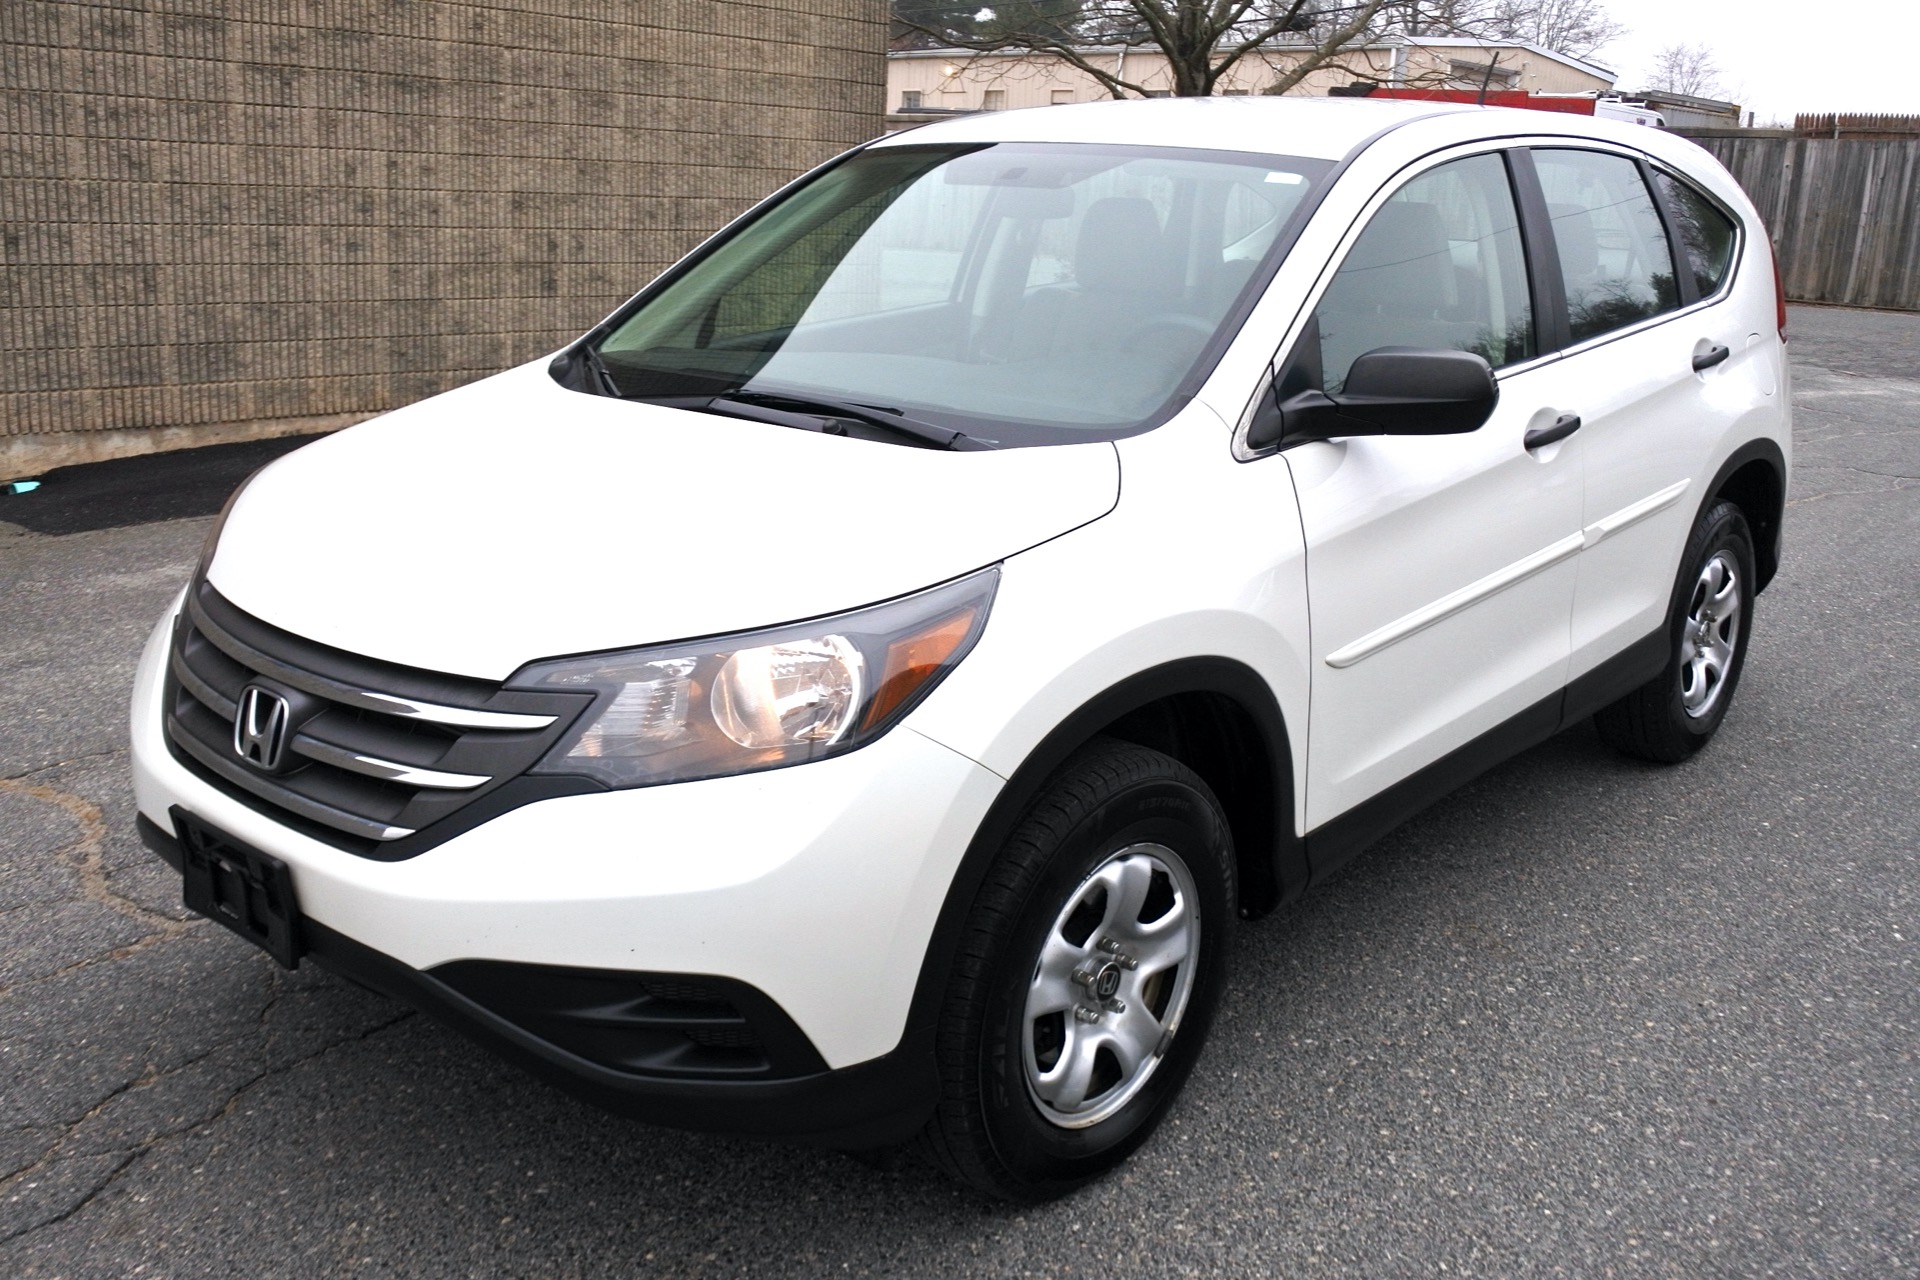 Used Honda Cr V Awd Dr Lx For Sale Metro West